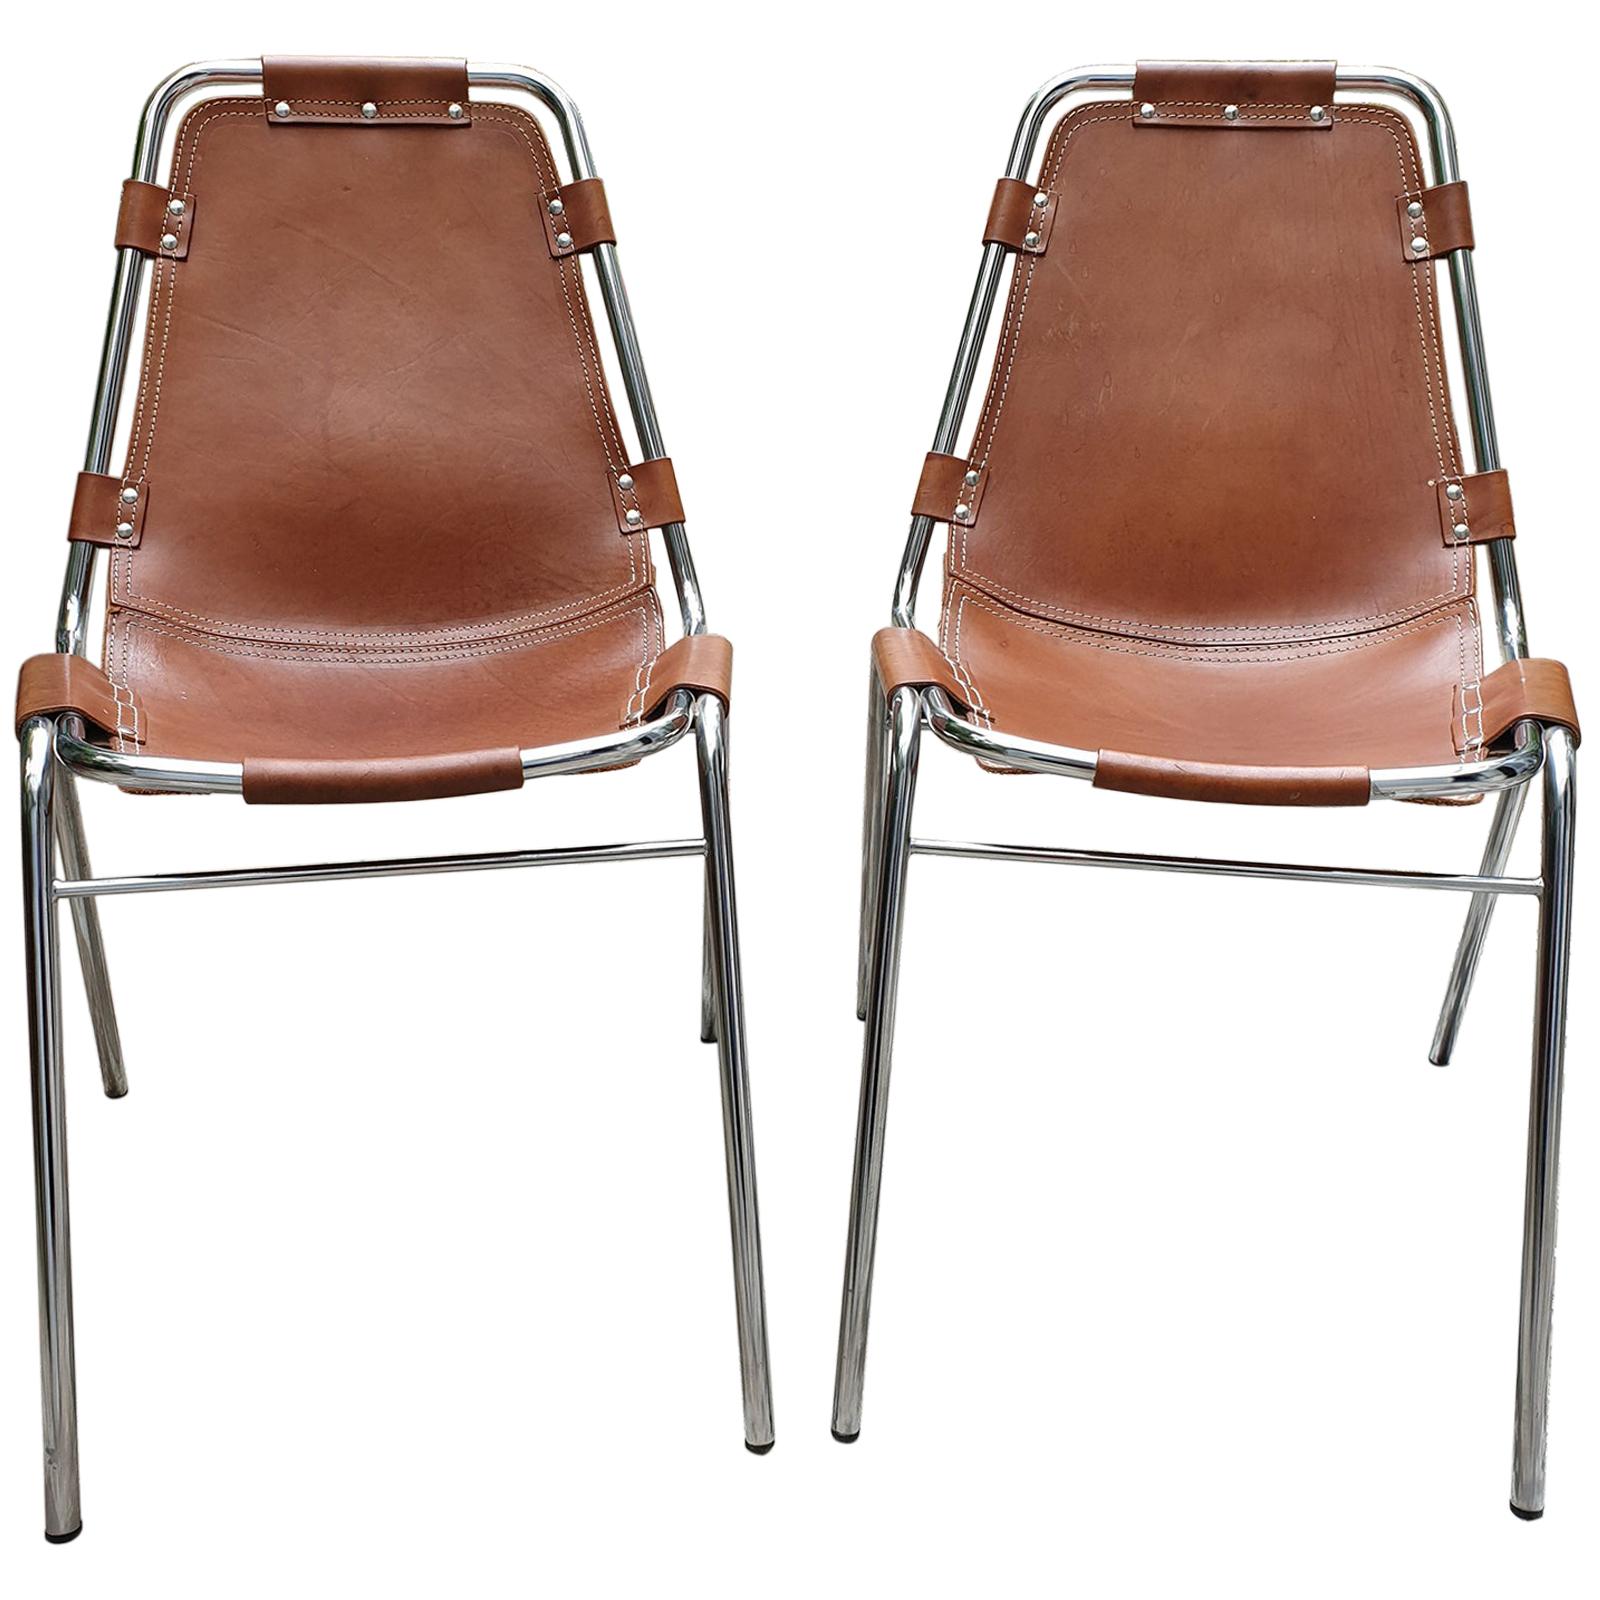 Charlotte Perriand, Pair of Les Arcs Chairs, Cassina Edition, 1960